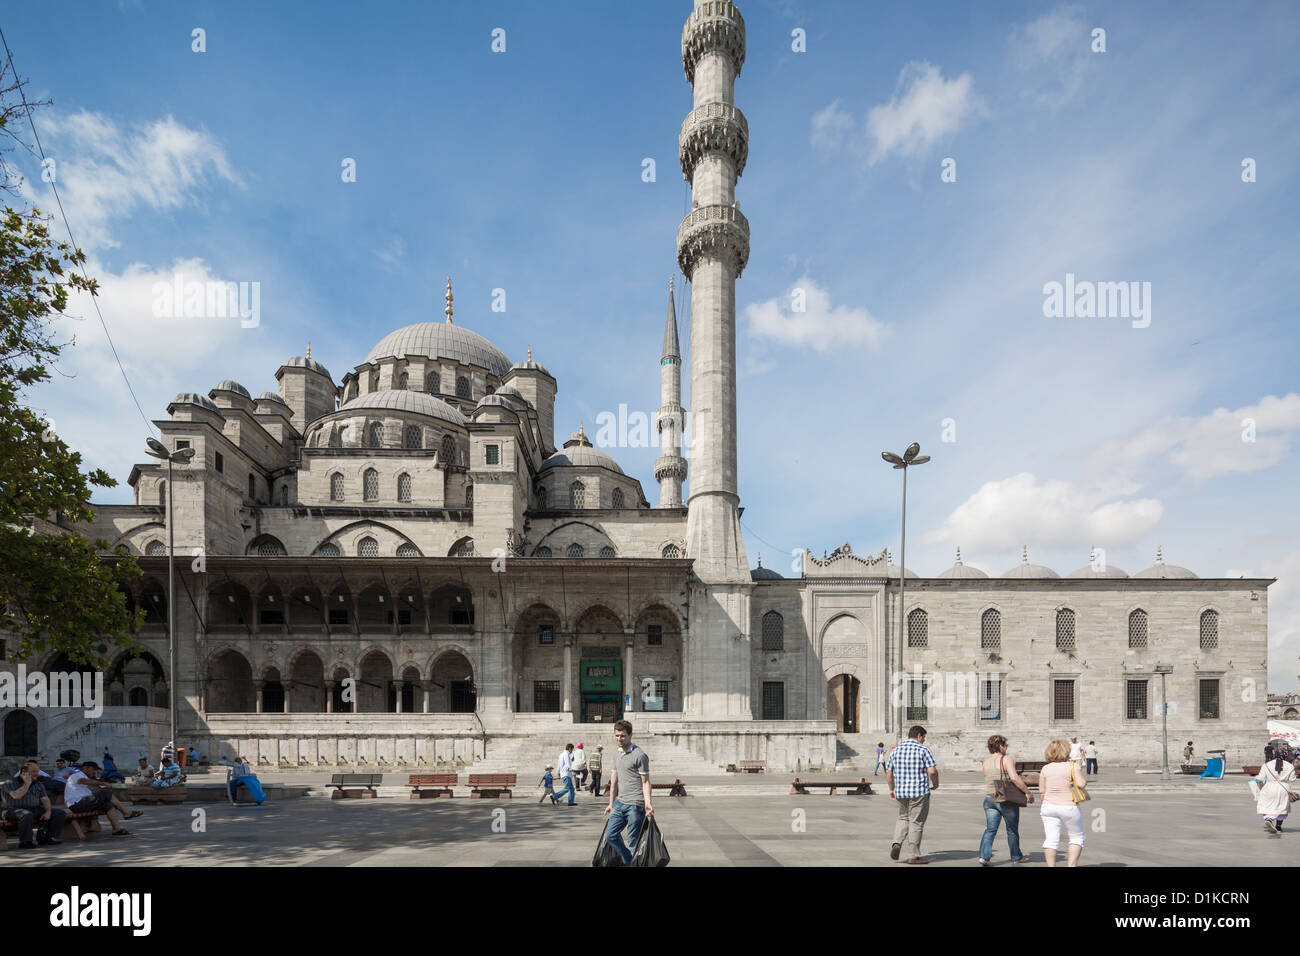 The Yeni Cami, or New Mosque, Eminönü district of Istanbul, Turkey. Stock Photo